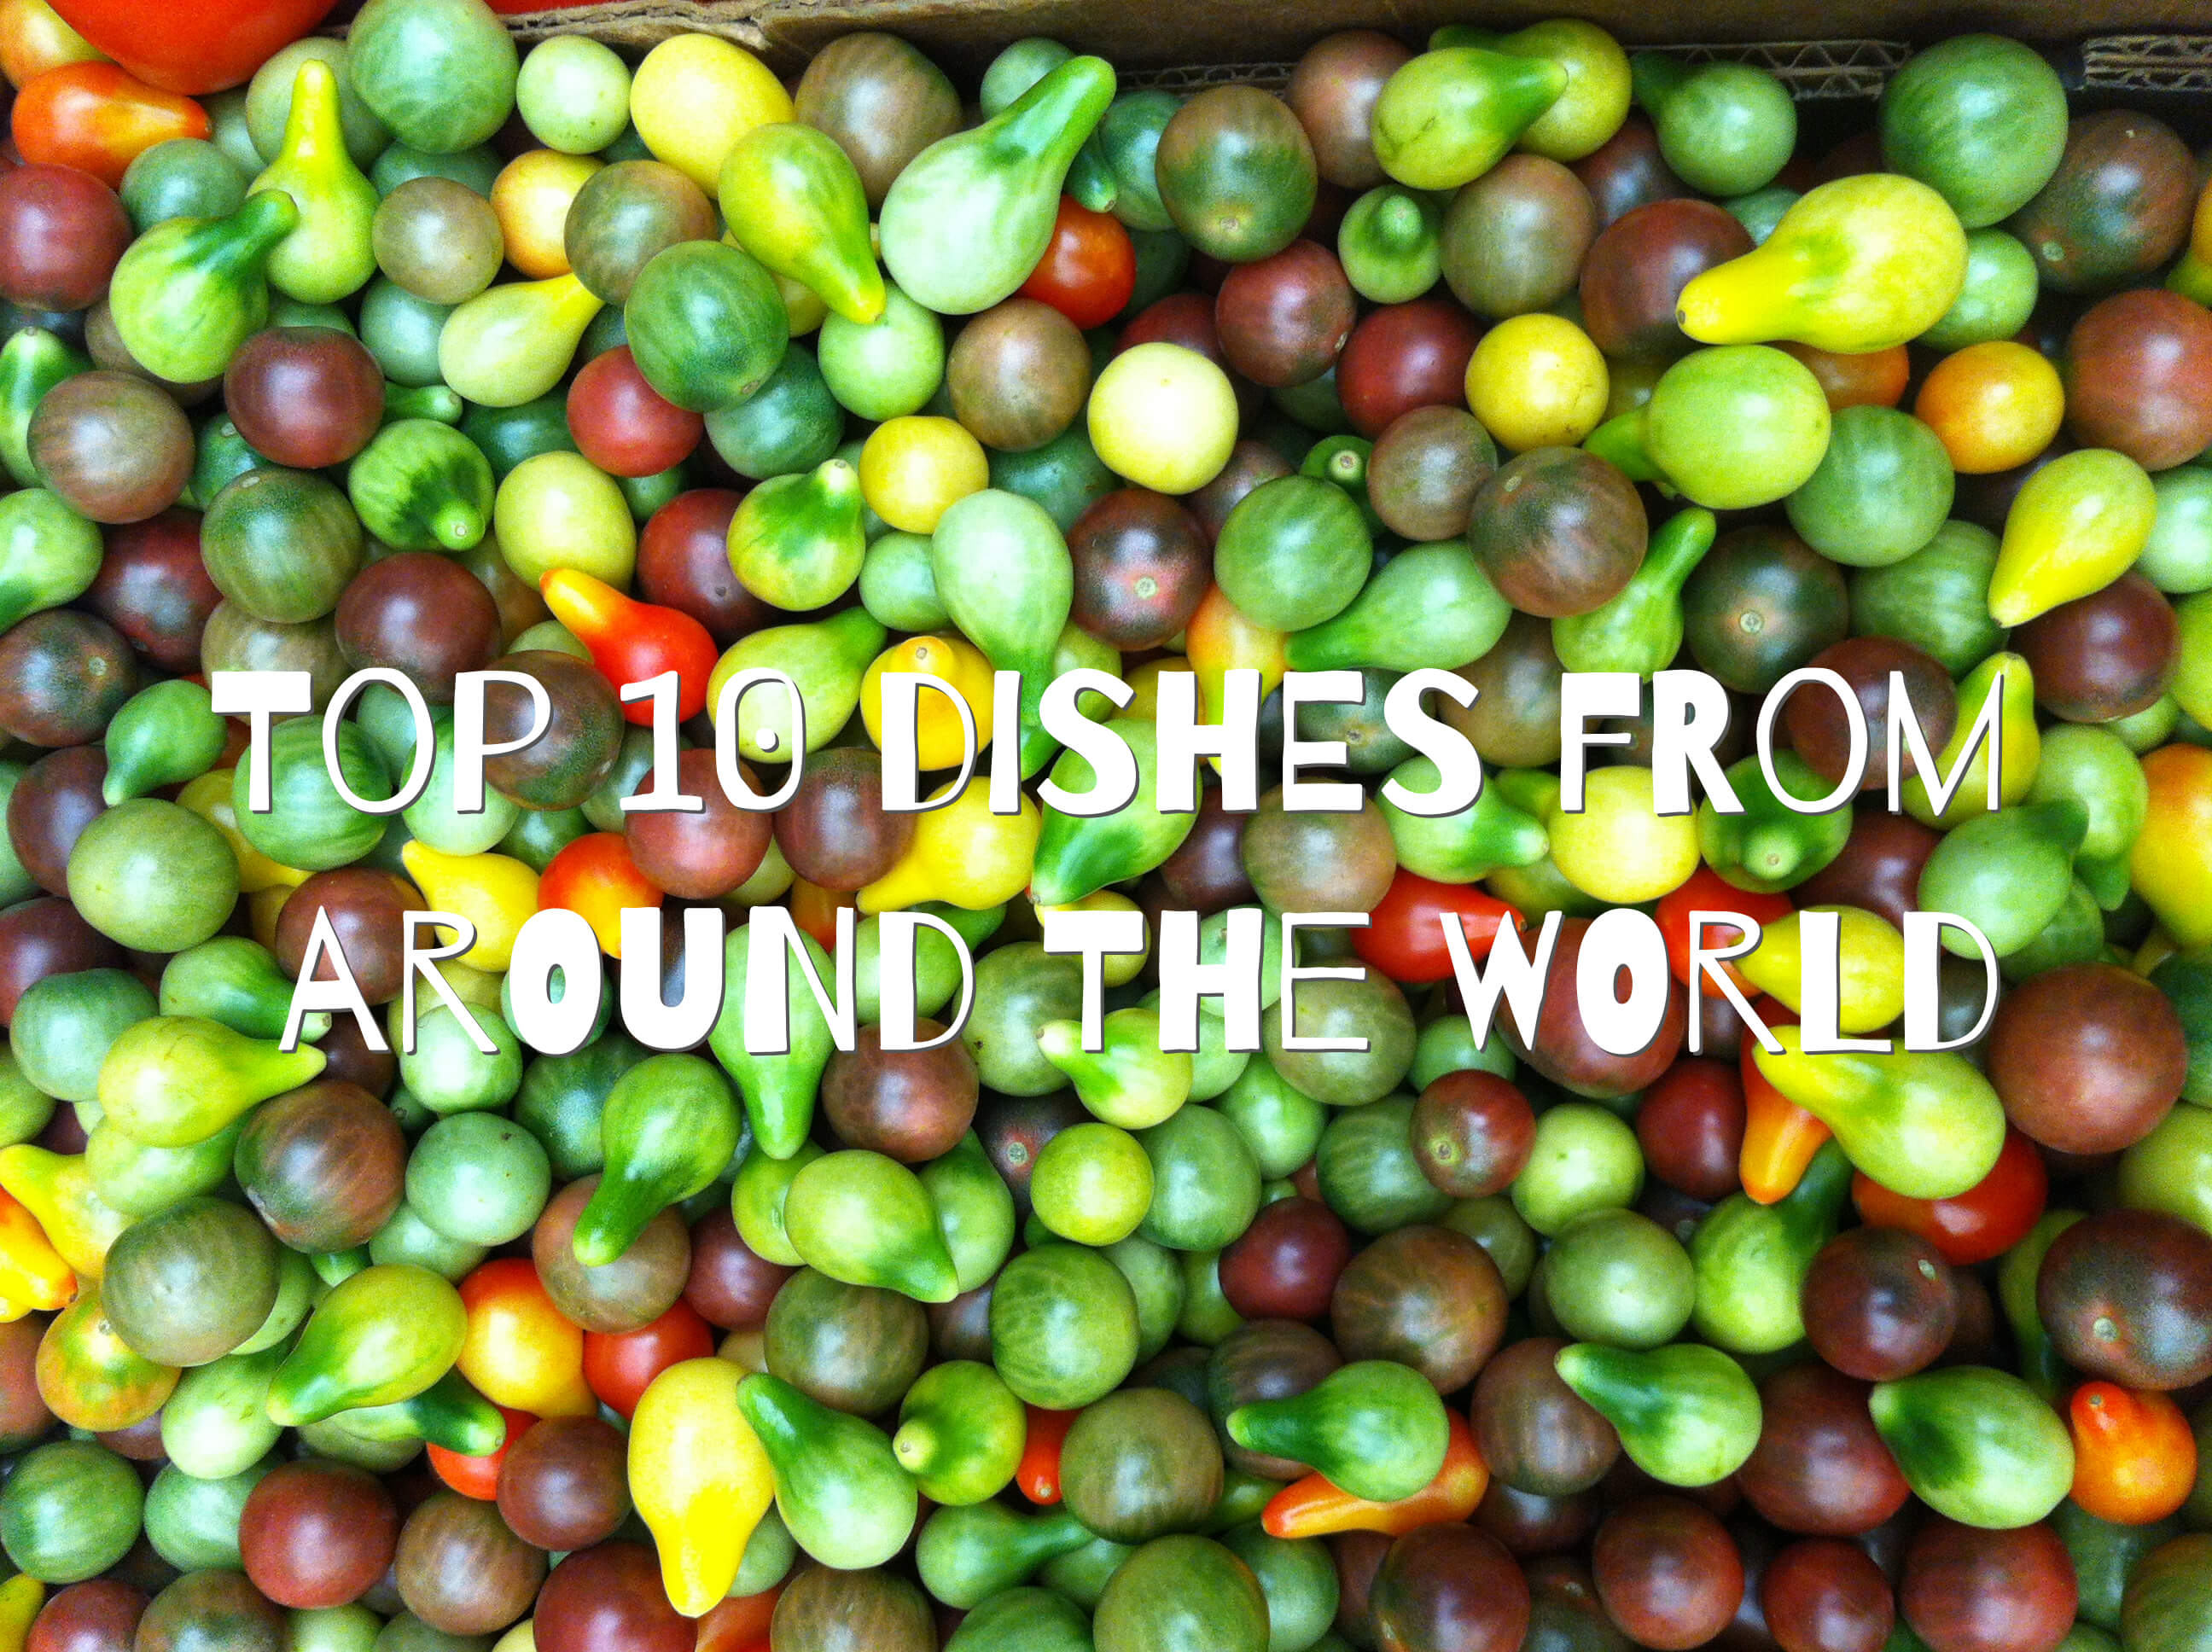 My top 10 dishes: eating my way around the world